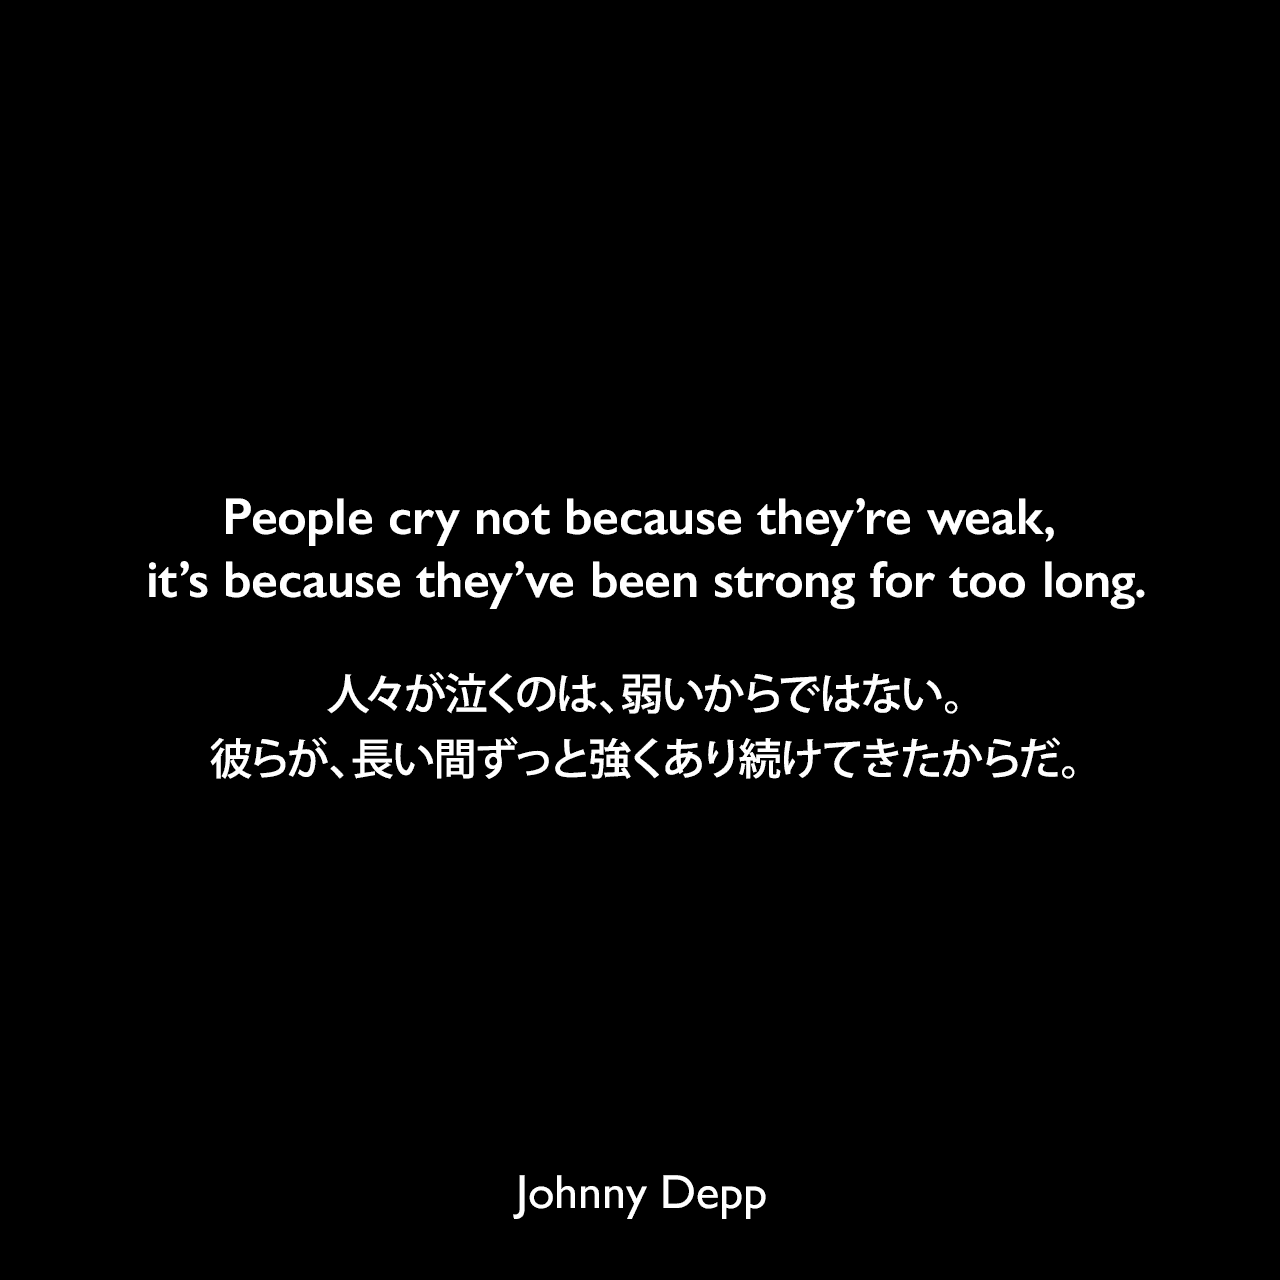 People cry not because they’re weak, it’s because they’ve been strong for too long.人々が泣くのは、弱いからではない。彼らが、長い間ずっと強くあり続けてきたからだ。Johnny Depp